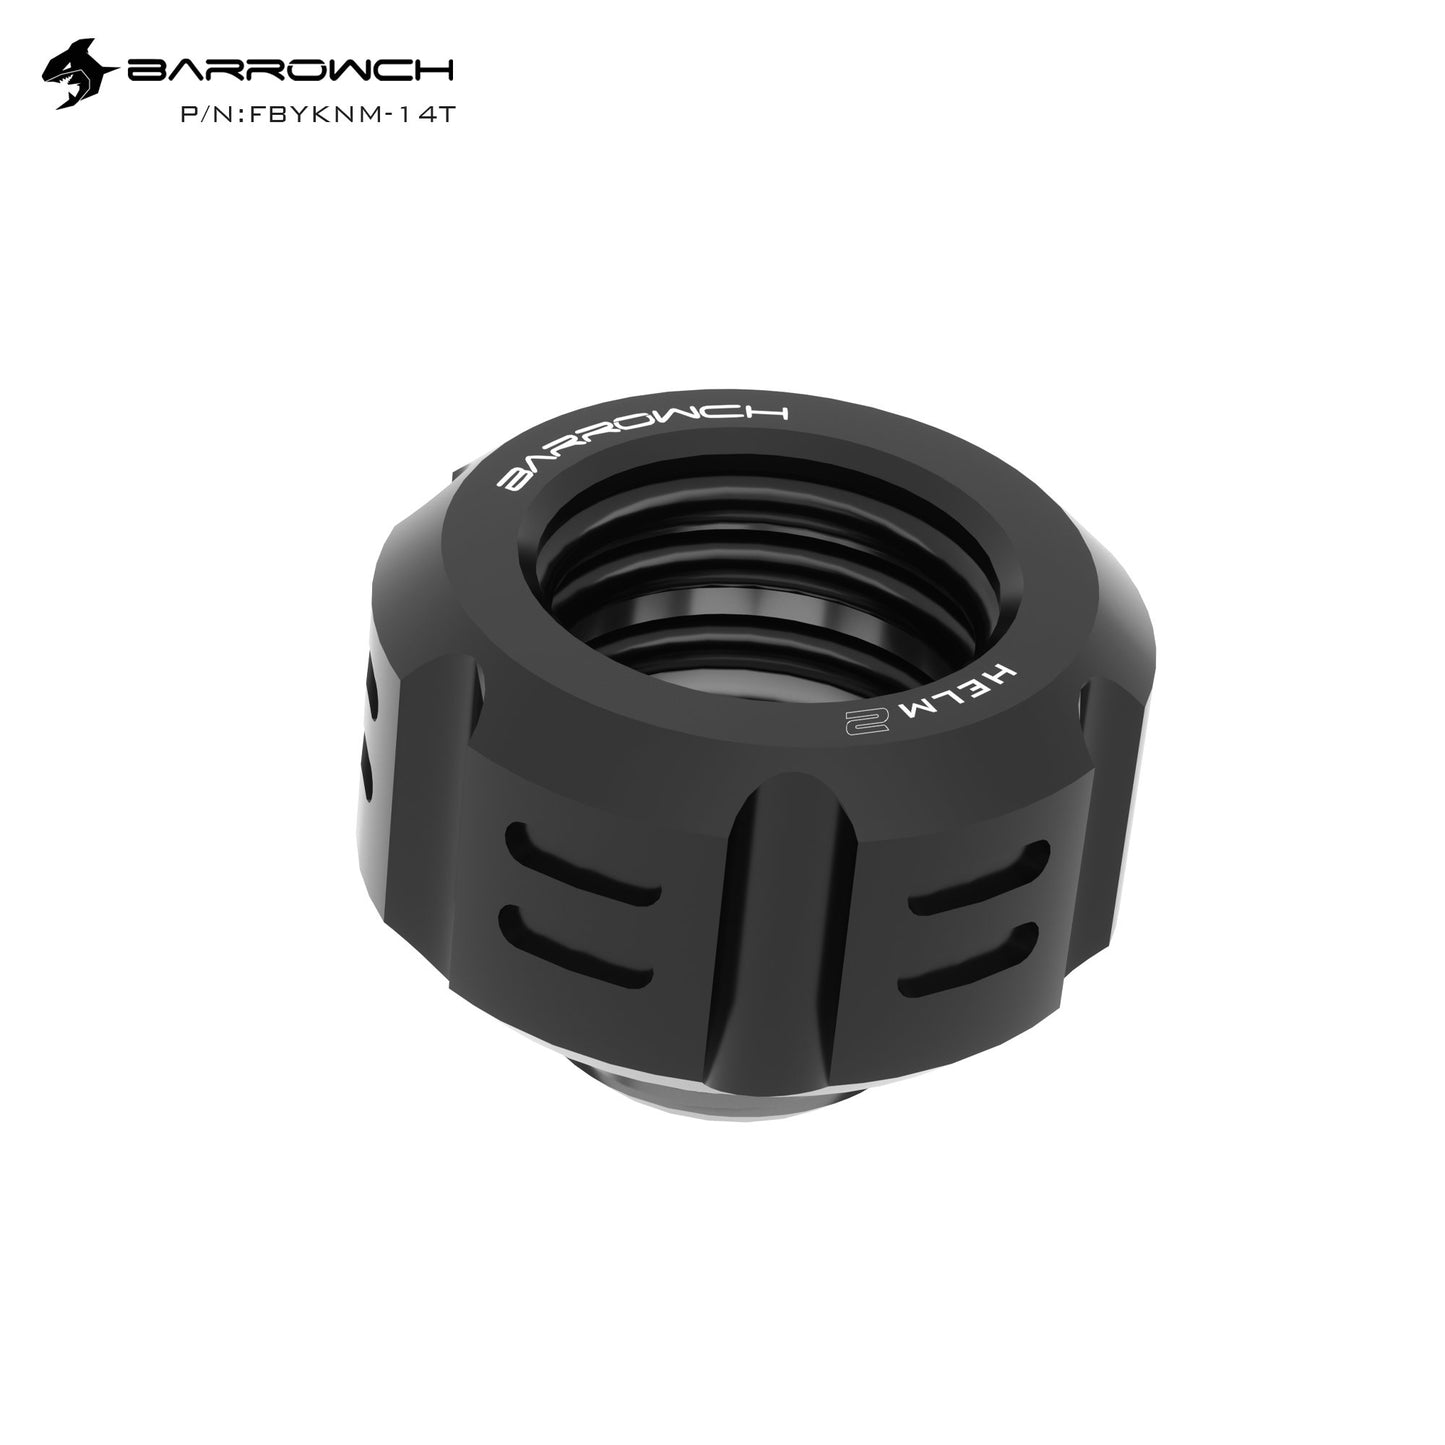 Barrowch Hard Fitting, Helm 2 Series For OD 14mm, Adapter For Water Cooling System, 1 set/6pcs, FBYKNM-14T